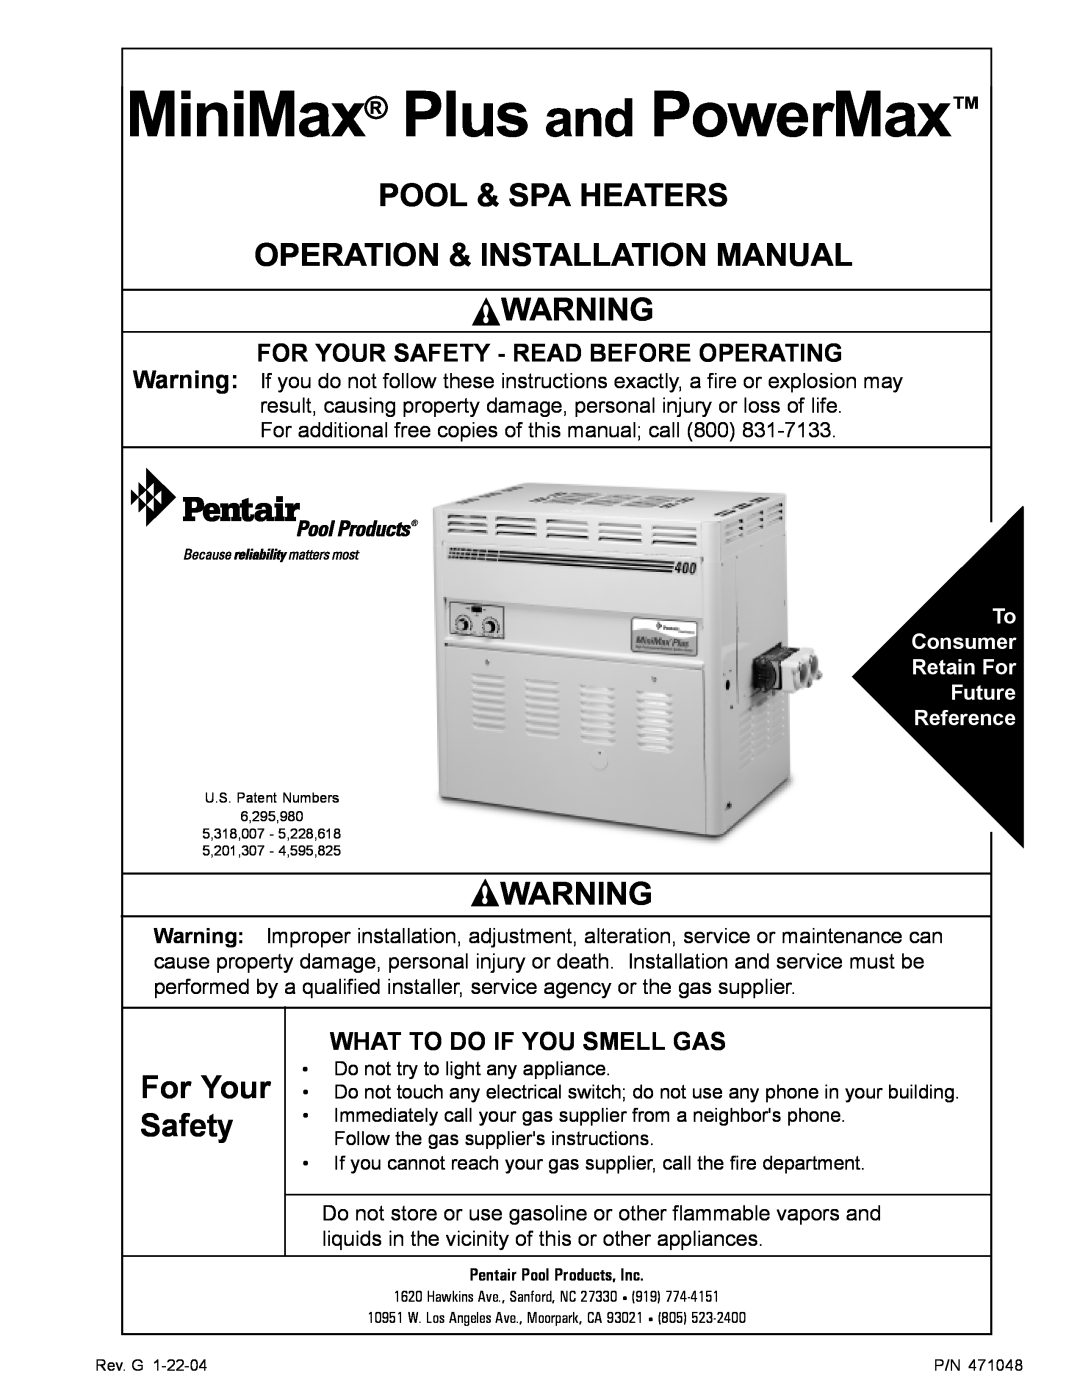 Pentair MiniMax Plus HP Series installation manual MiniMax Plus and PowerMax, Pool & Spa Heaters, For Your Safety 